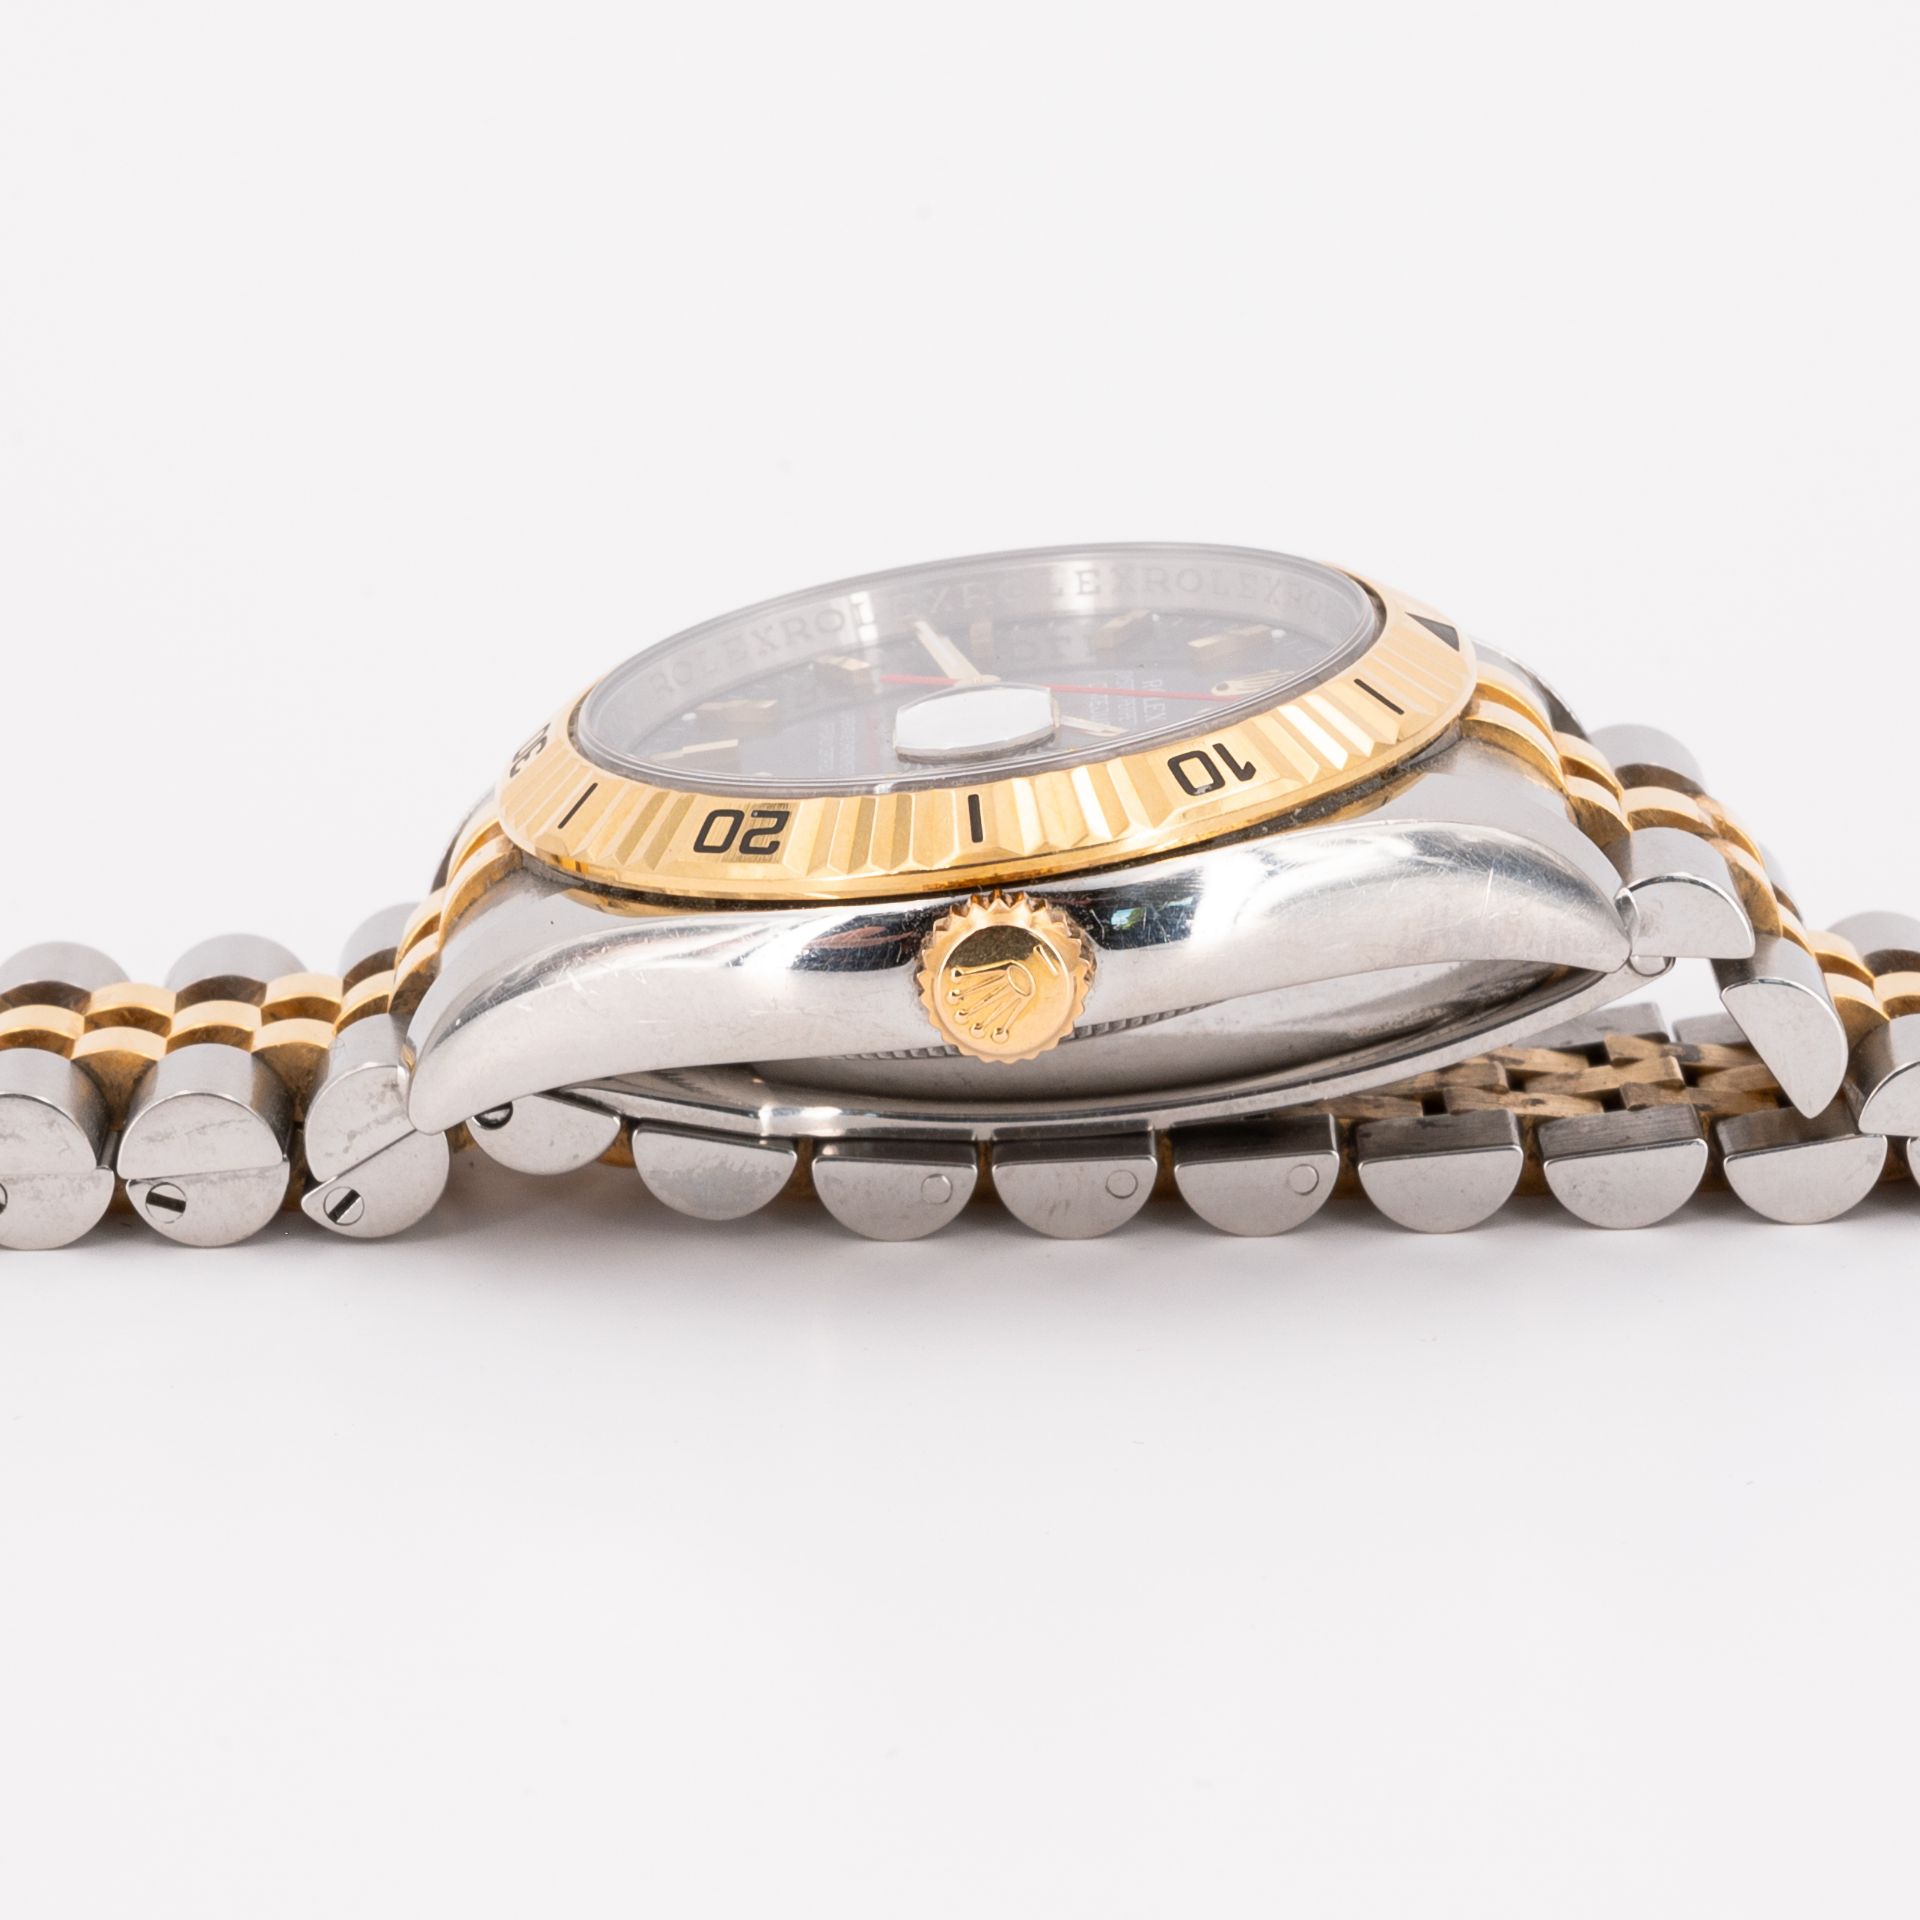 Rolex: Datejust Turn-o-graph - Image 5 of 8